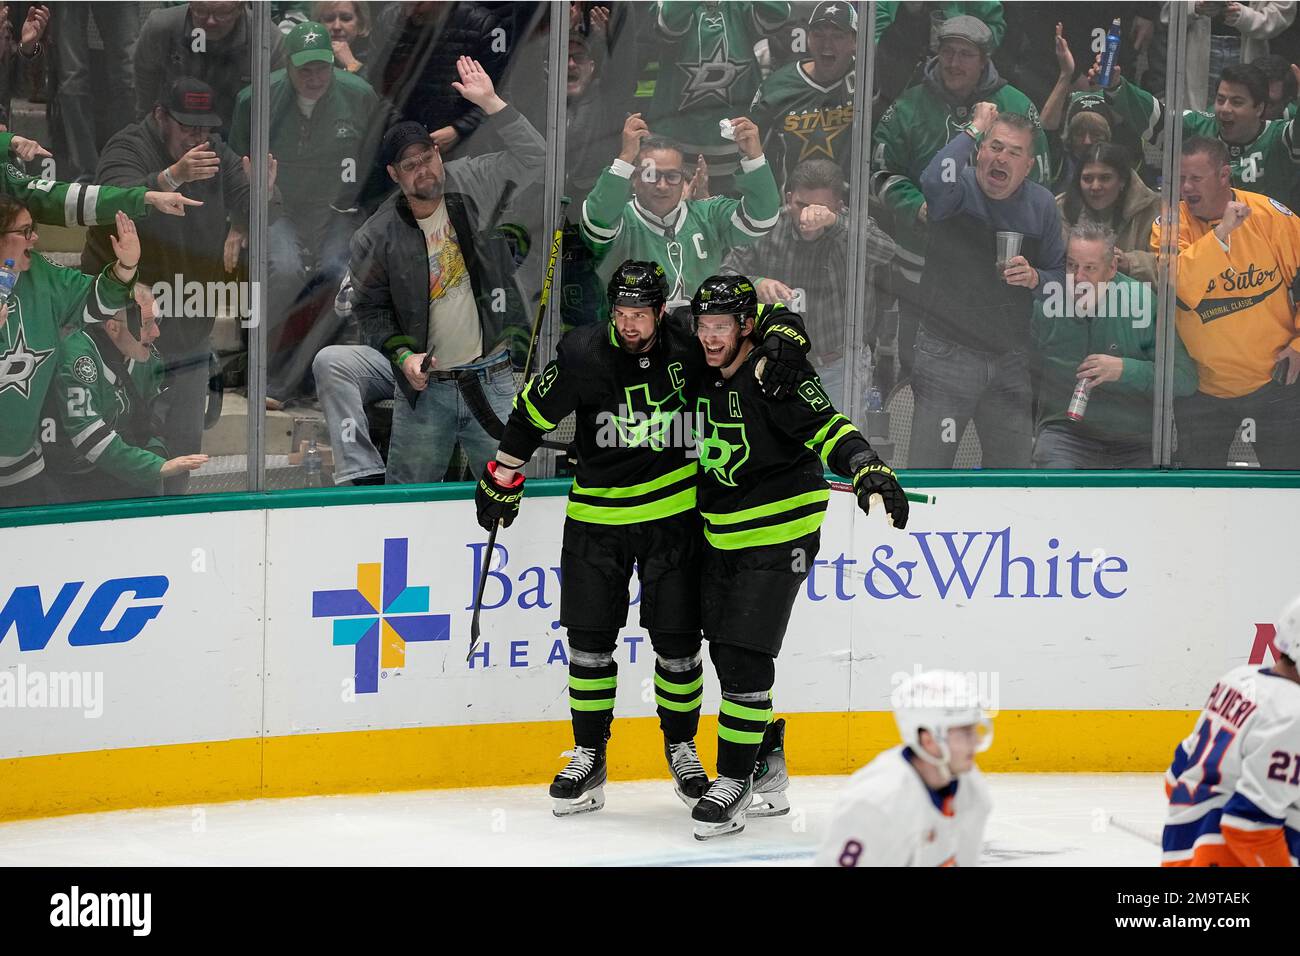 Fans cheer as Dallas left wing Benn (14) and center Tyler Seguin (91) celebrate after Benn's goal in the third period of an NHL hockey game against New York